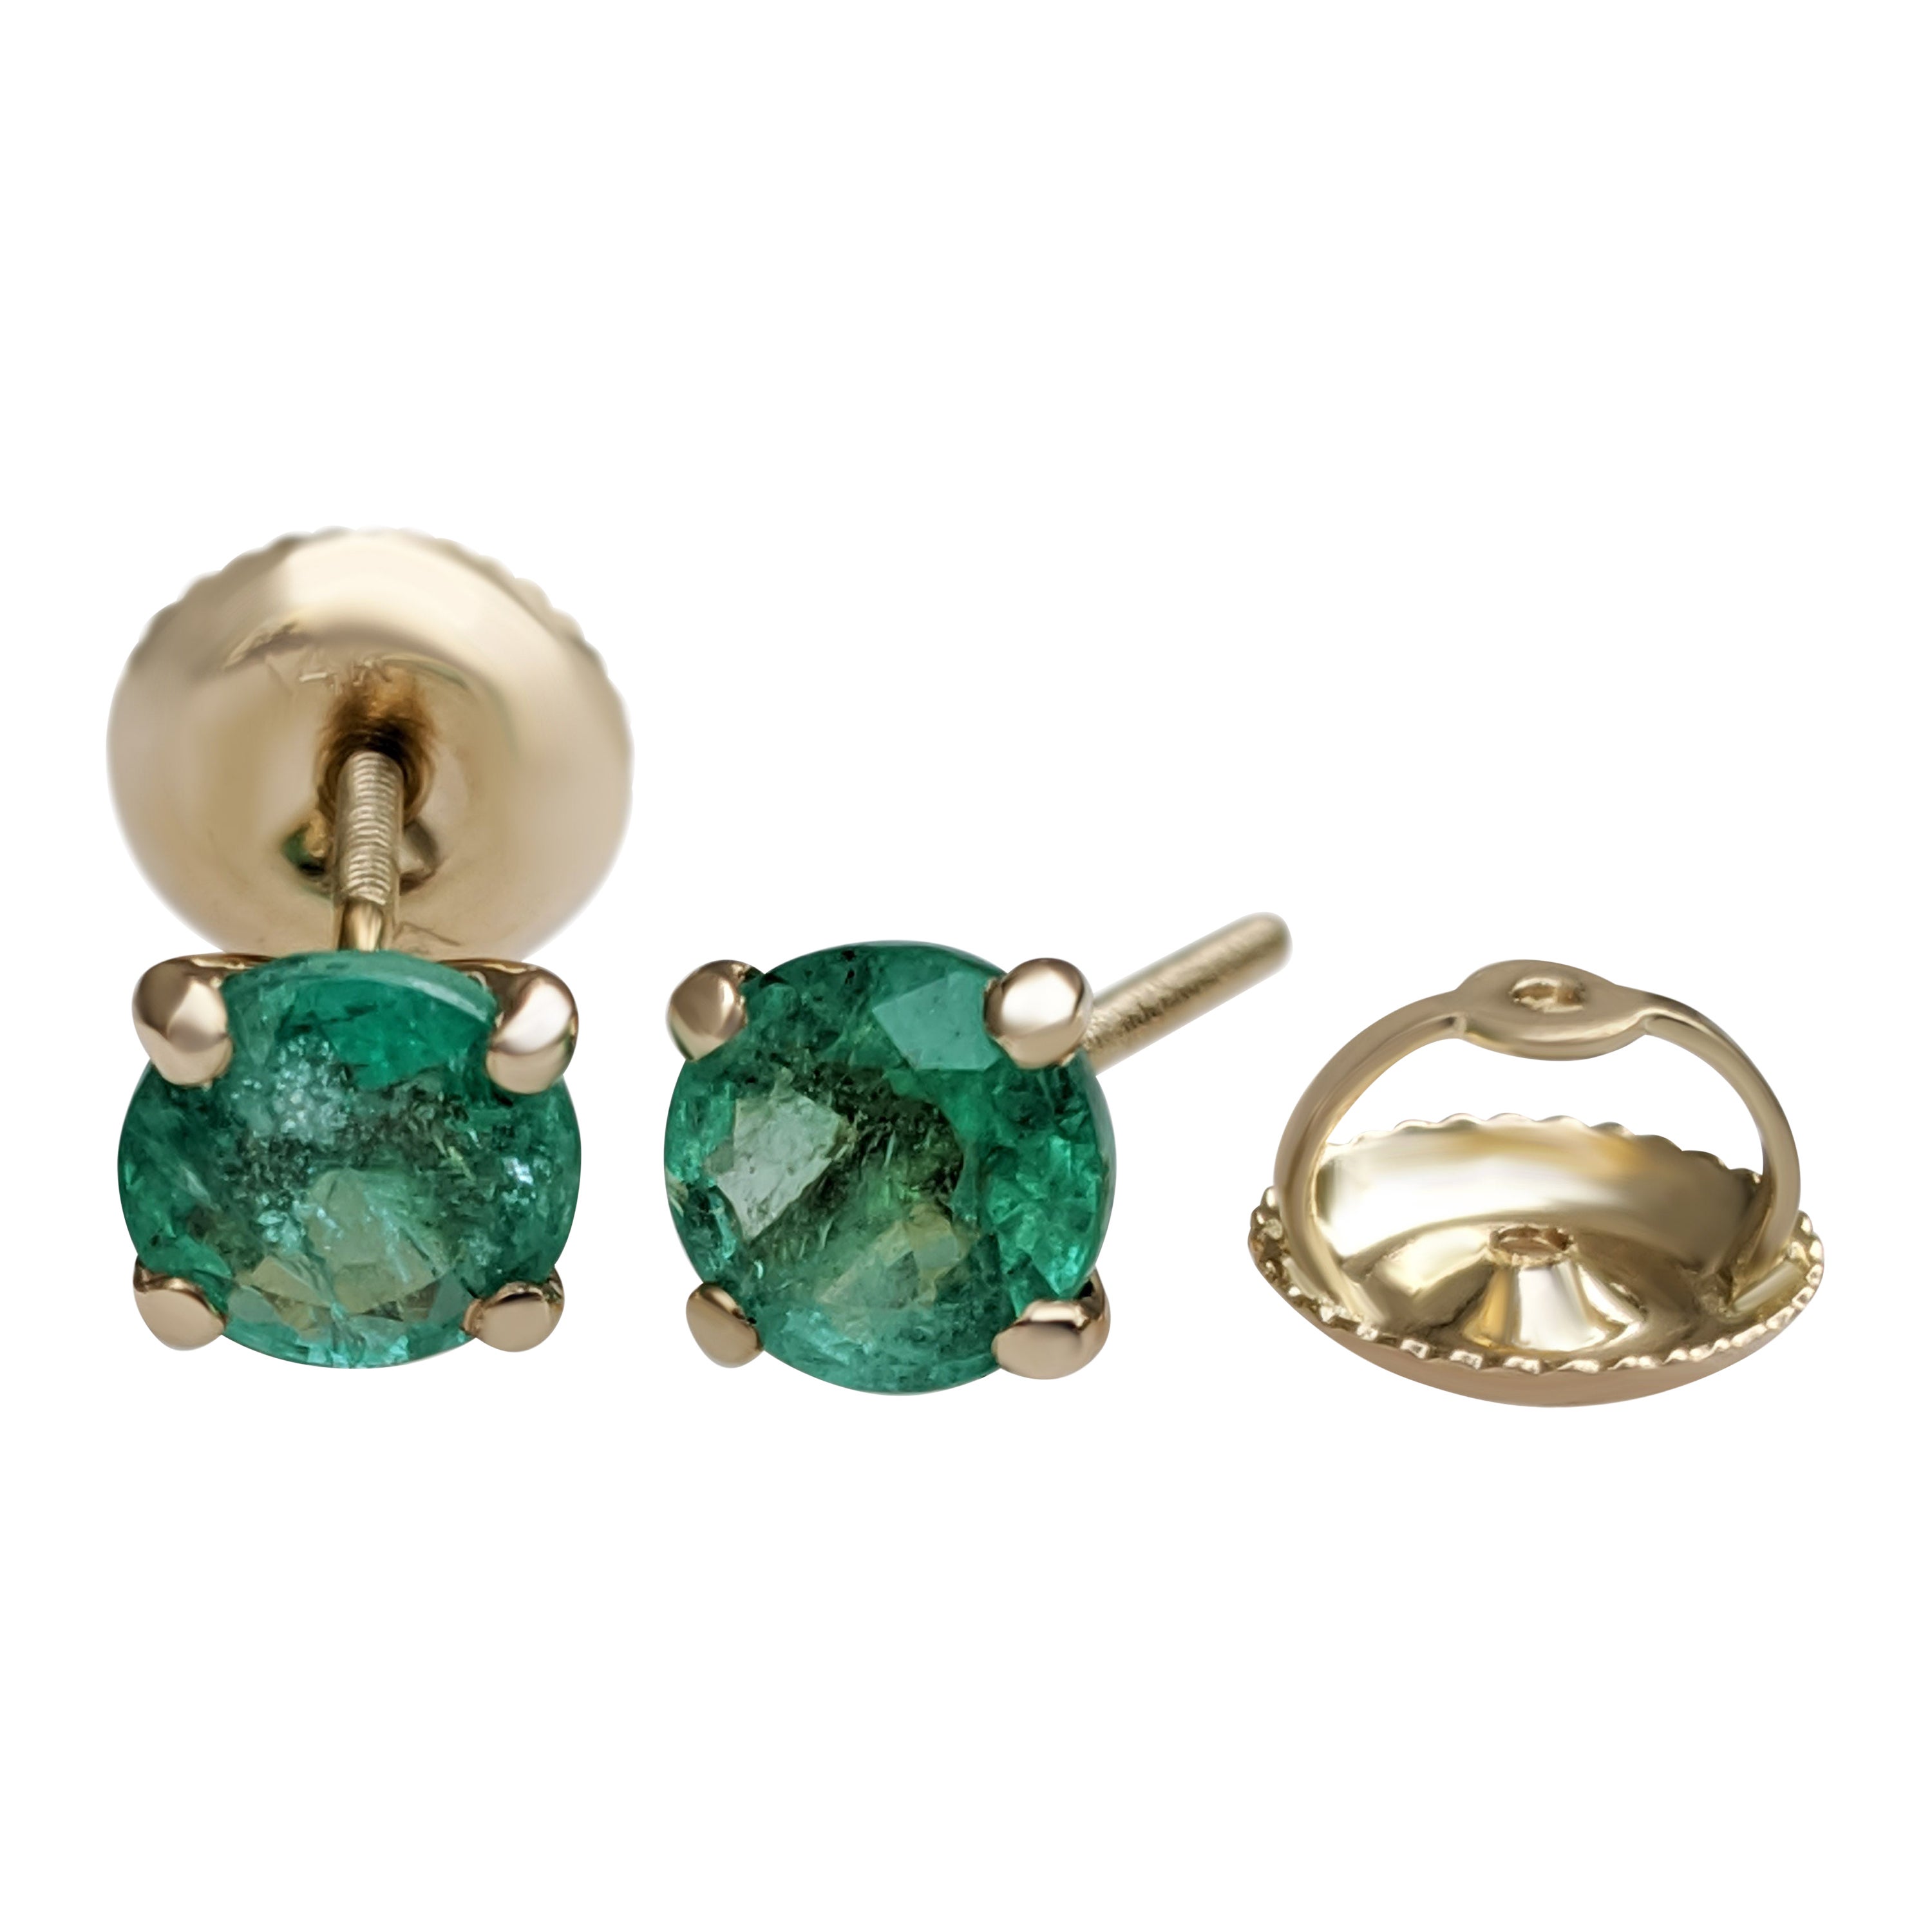 NO RESERVE! 1.04 Ct Emerald - 14 kt. Yellow gold - Earrings